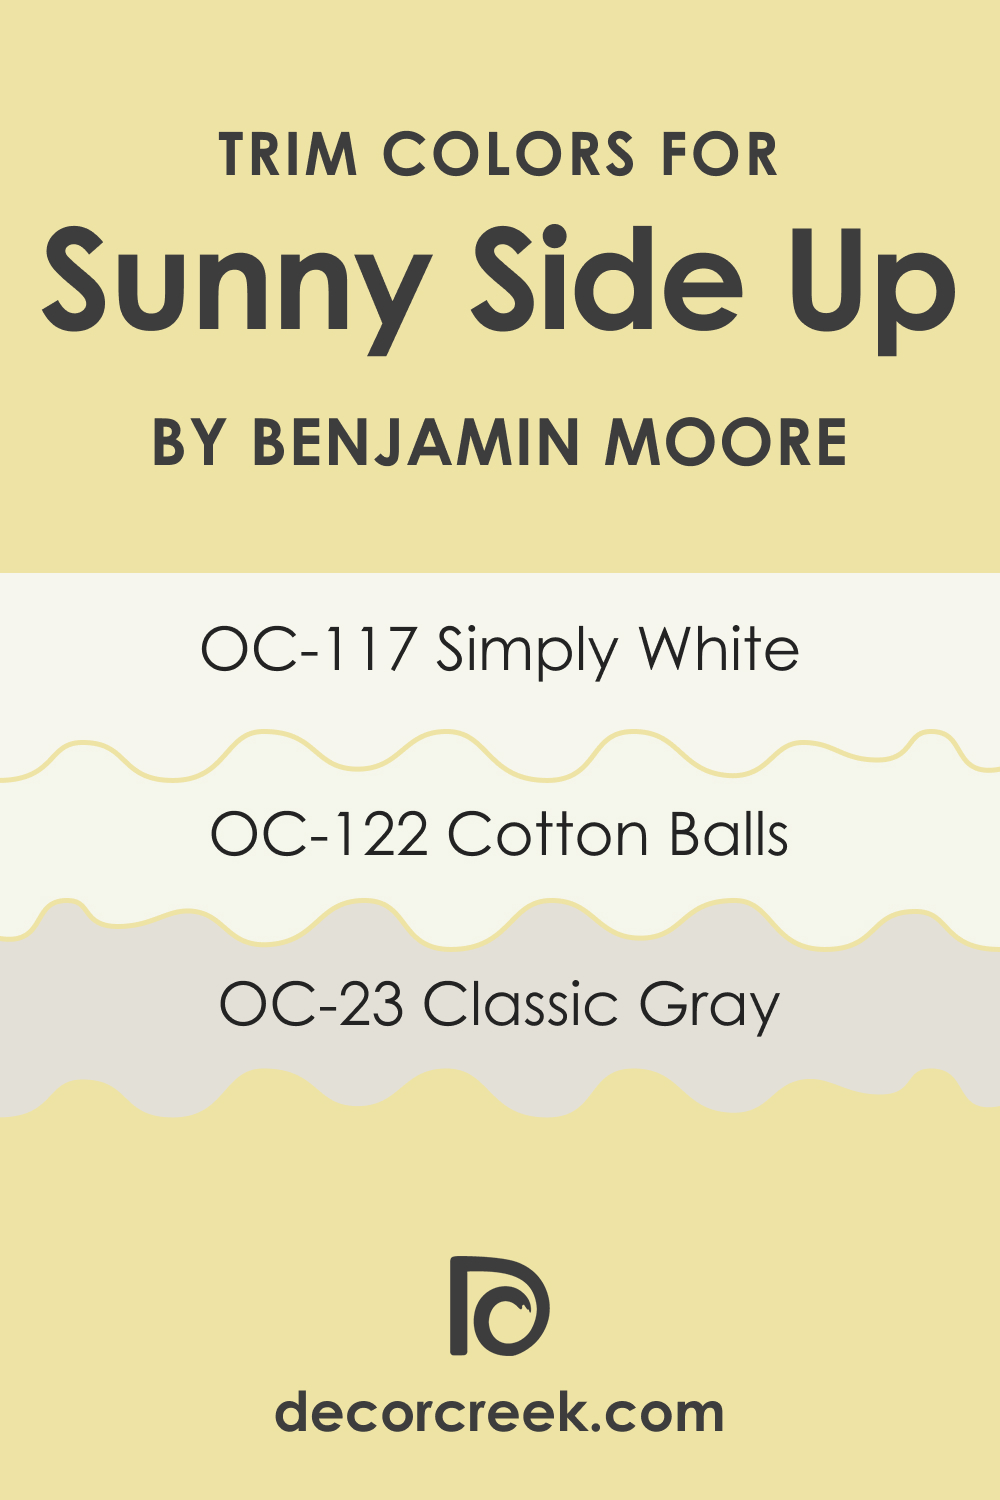 Trim Colors of Sunny Side Up 367